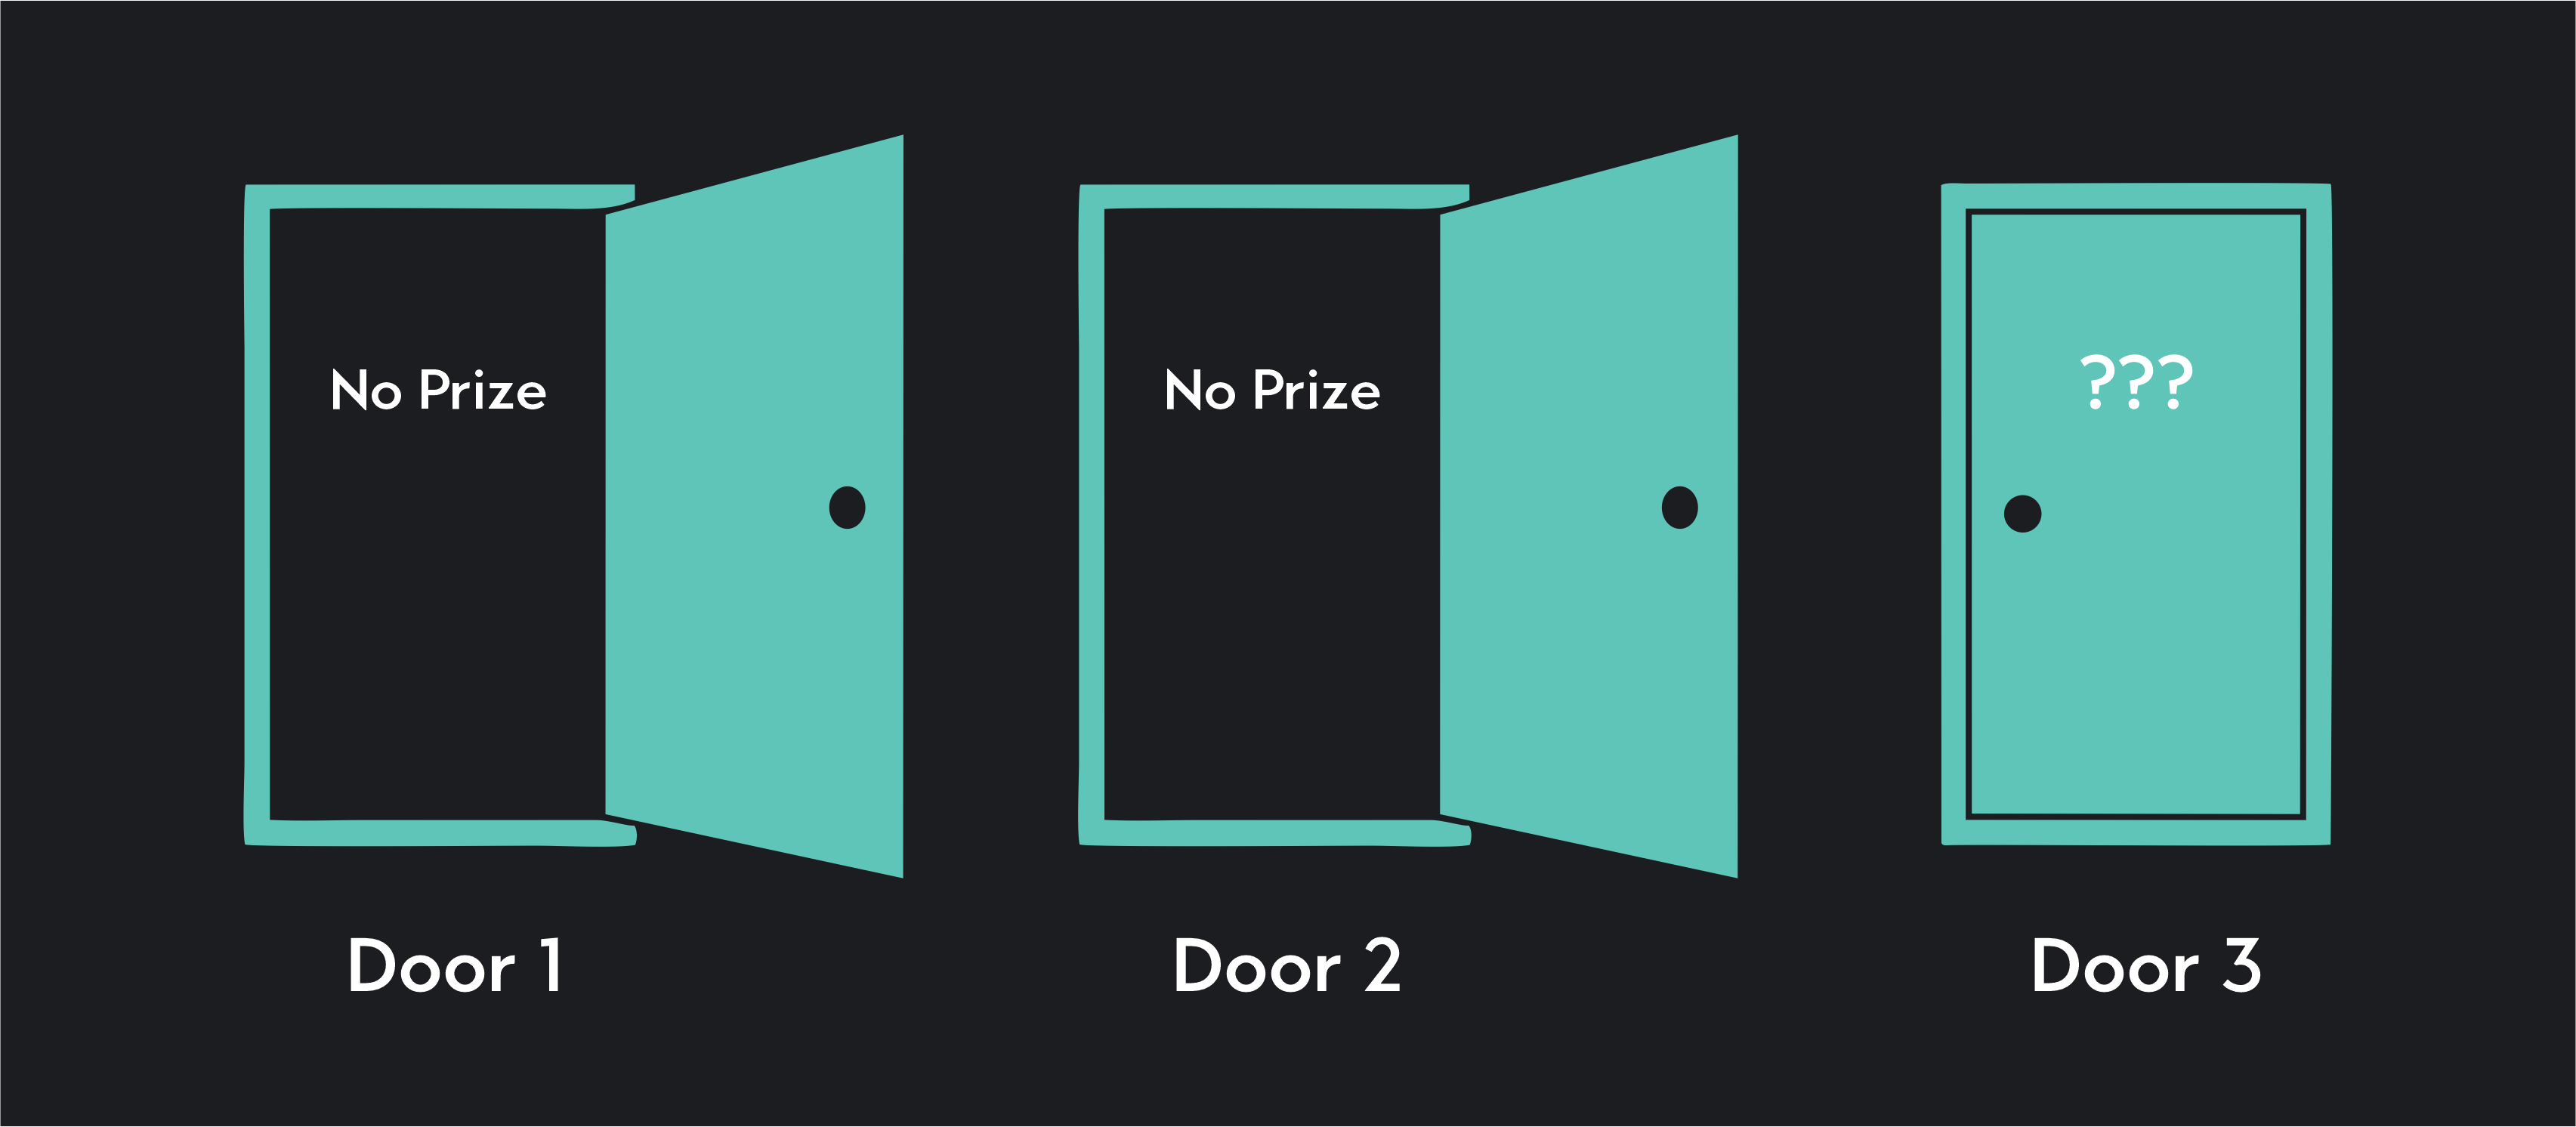 Graphic of doors to a game show to show the intuition behind degrees of freedom